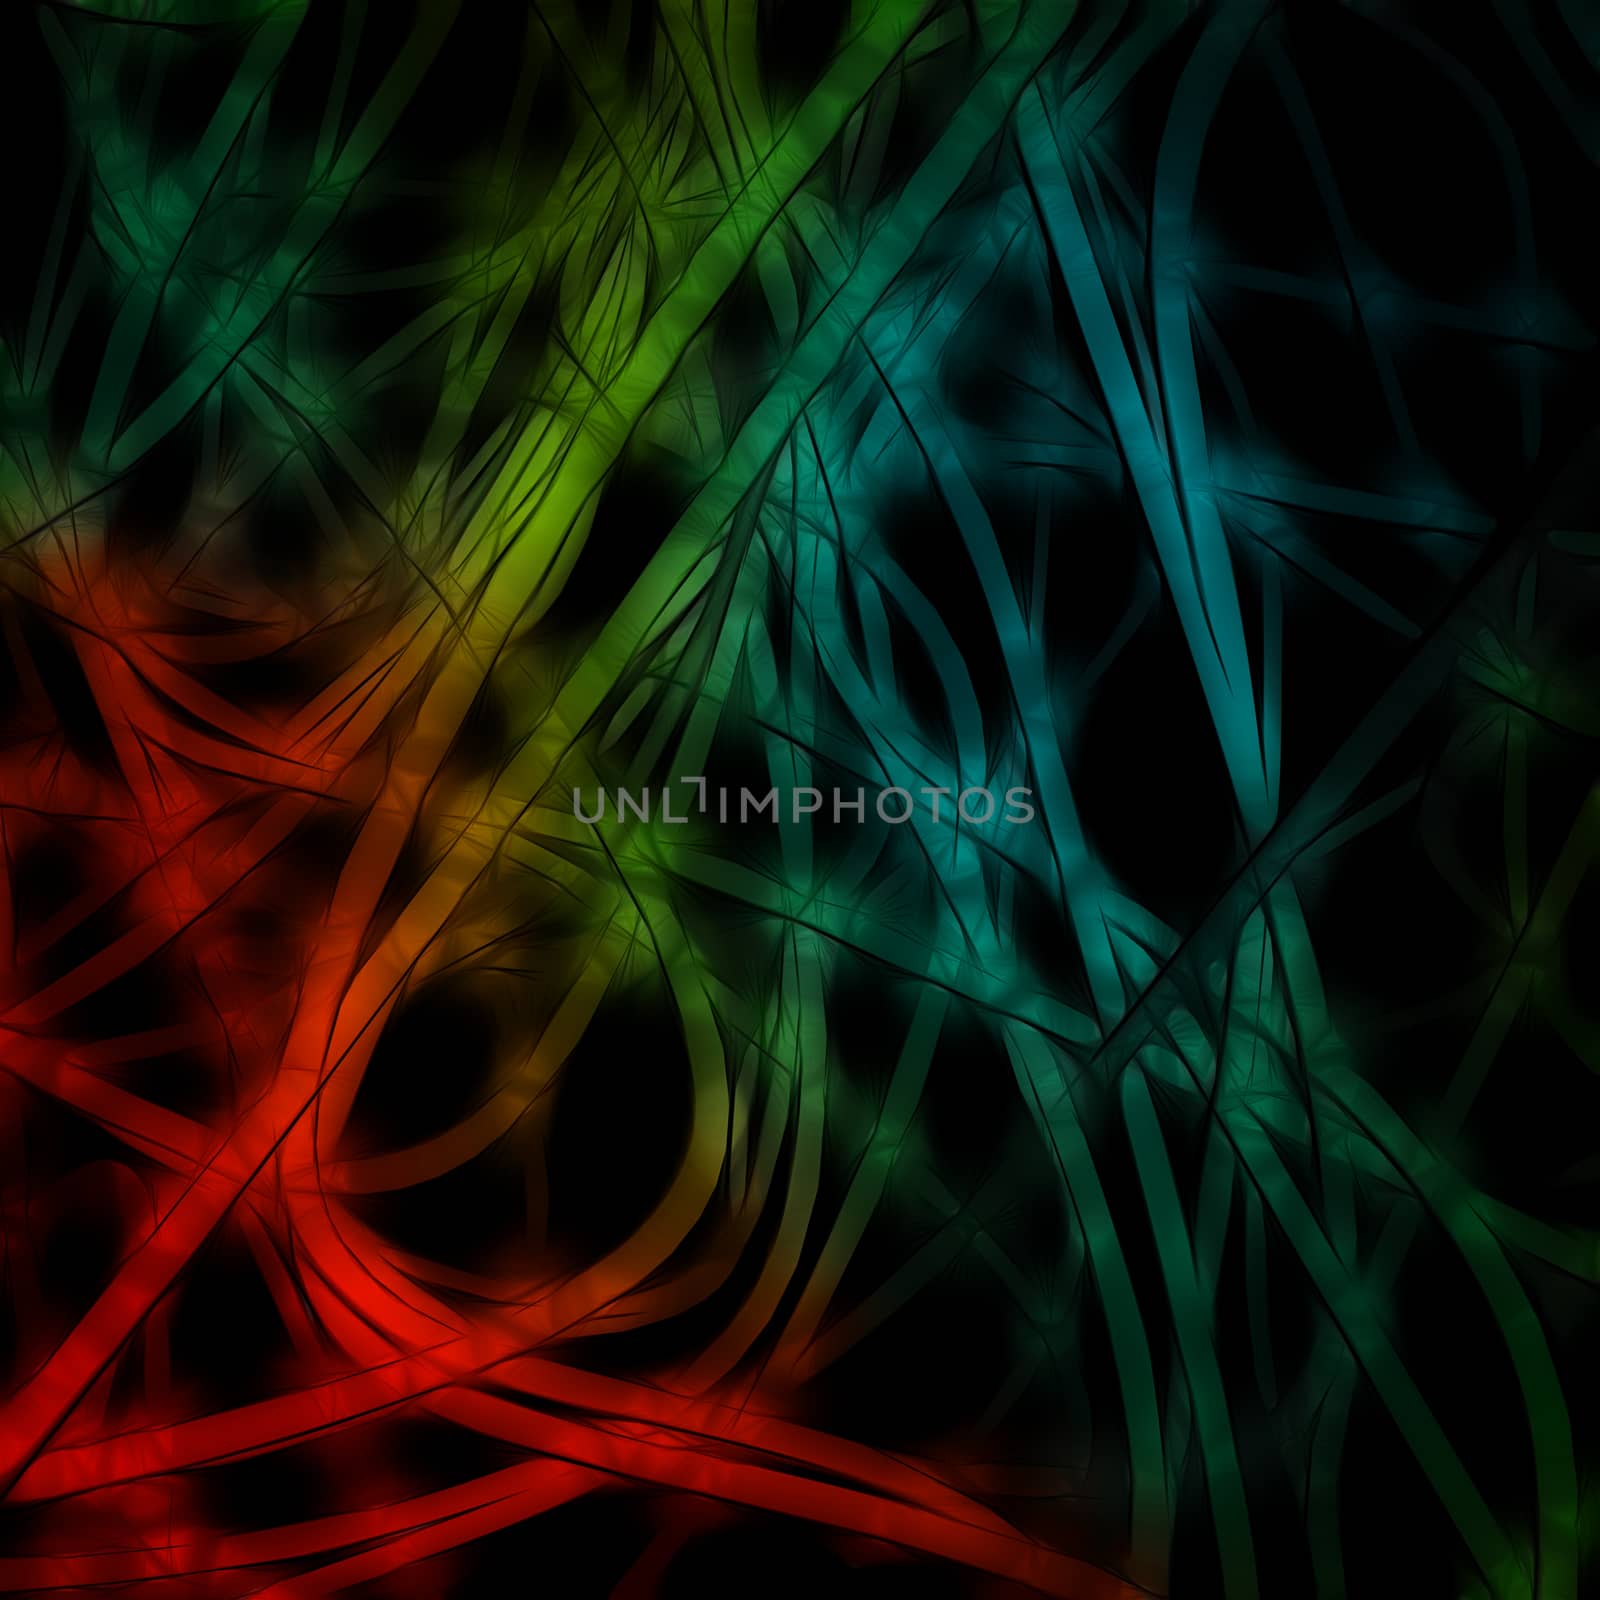 Abstract background with lines made in 2d software